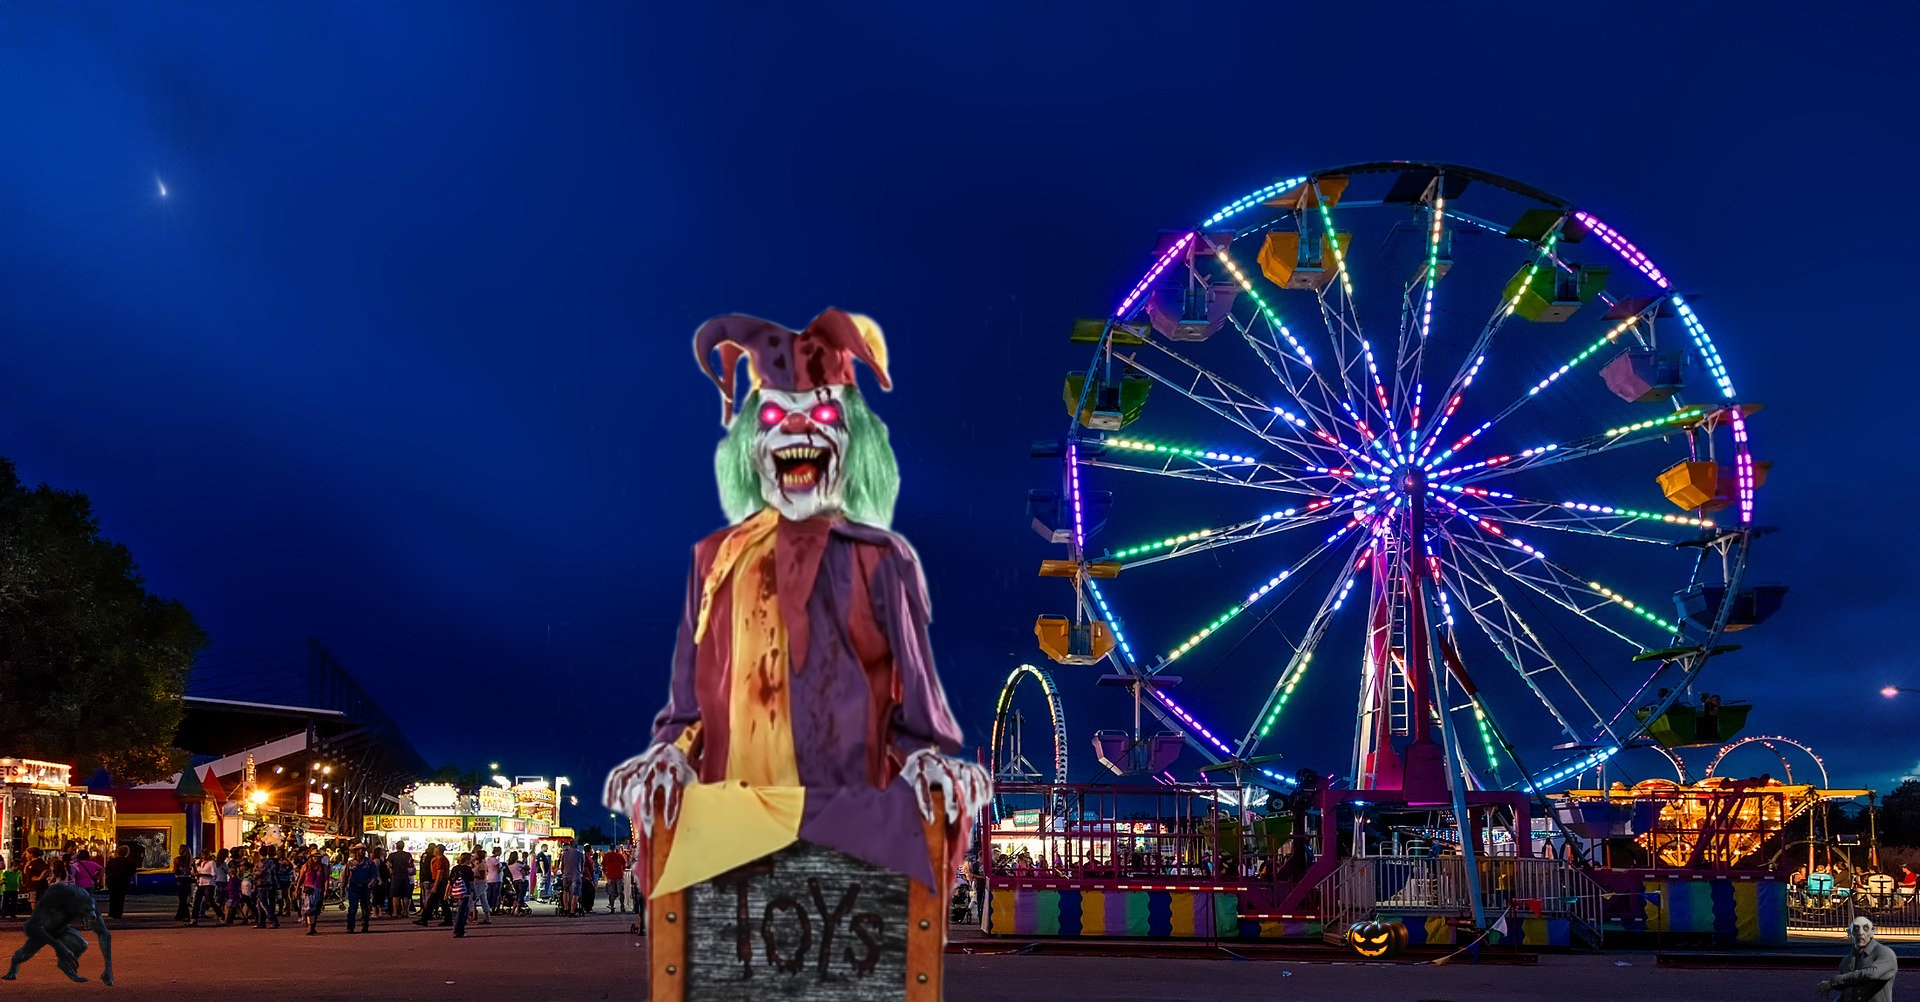 A possessed clown animatronic terrorizes a carnival amid other supernatural creatures looking to stake their bloody claim!